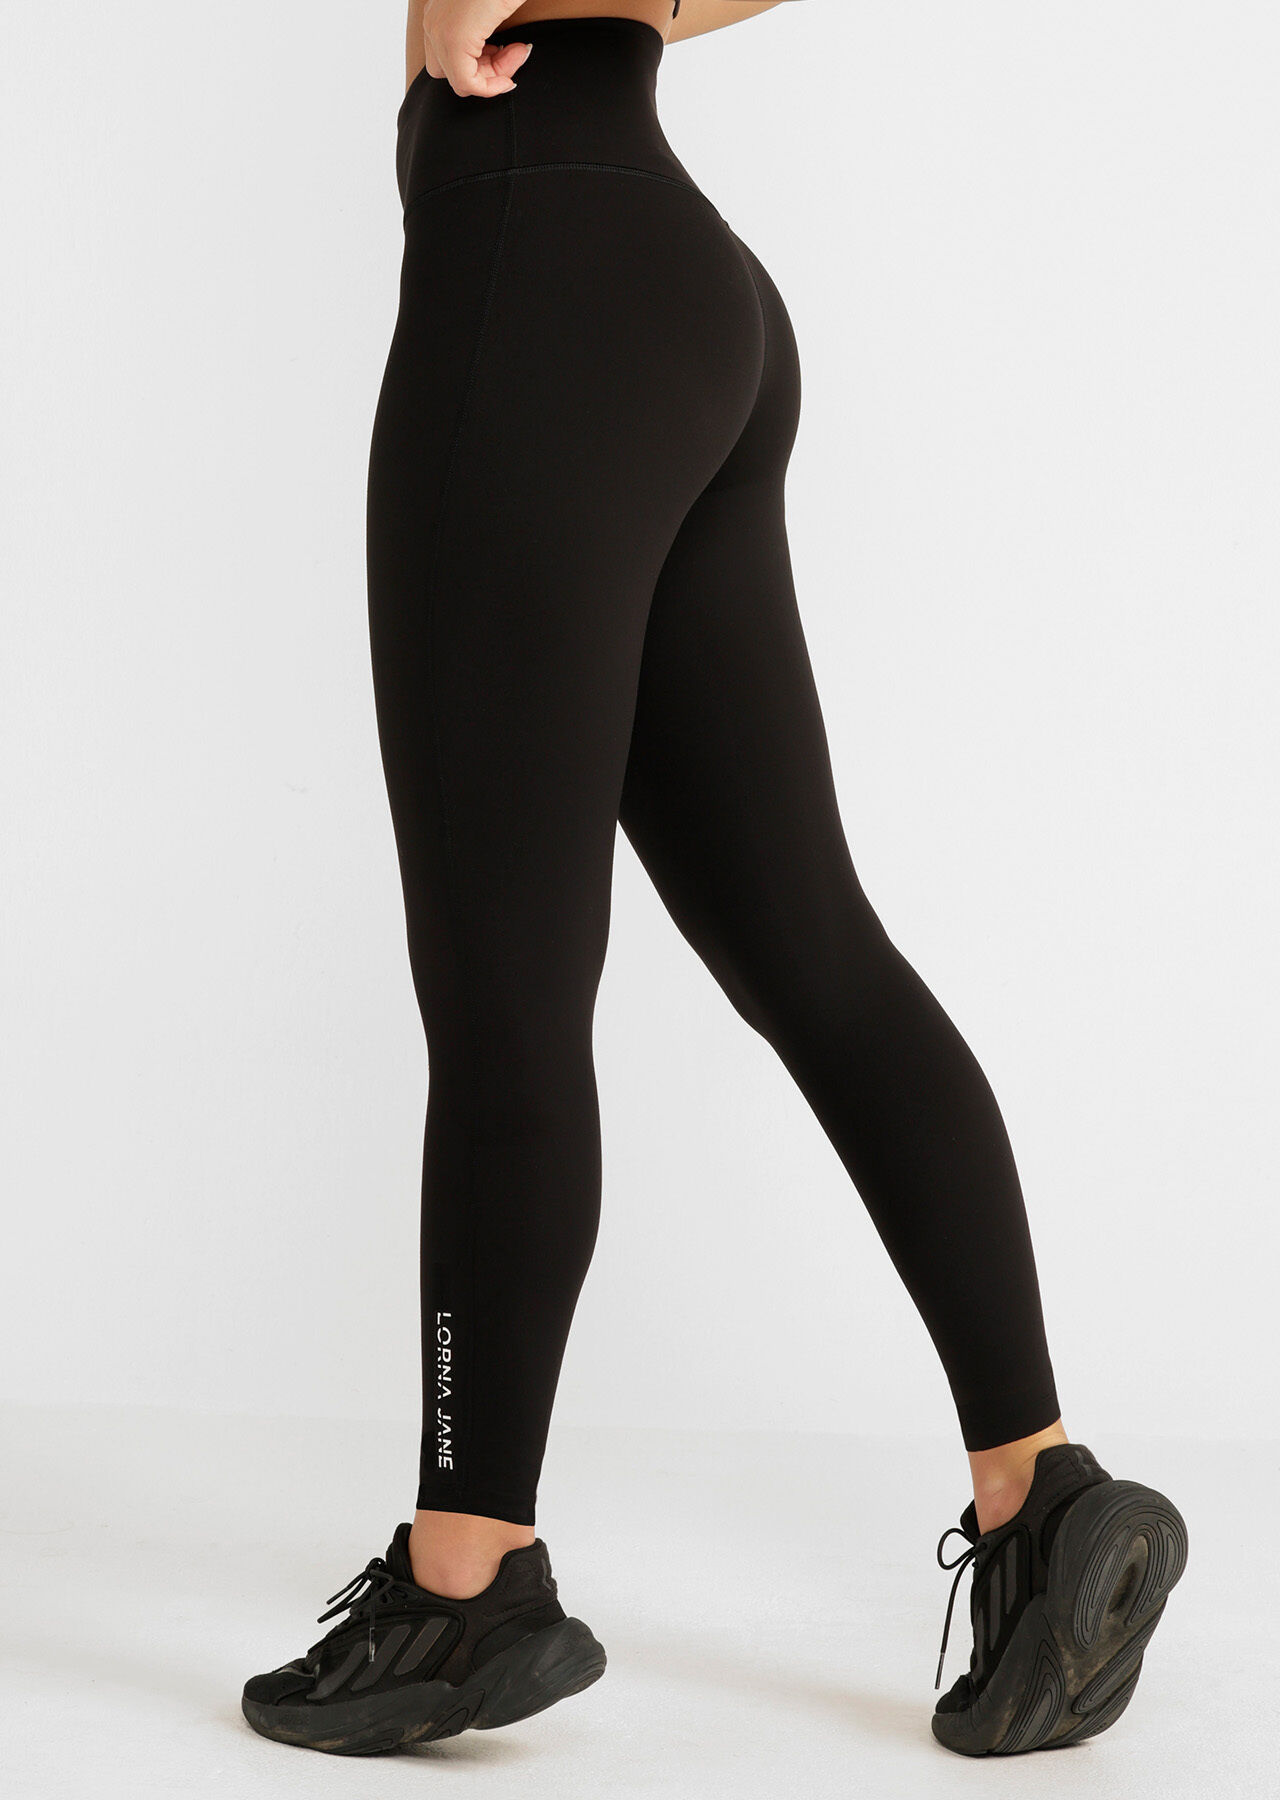 CTHH 2 Pack Leggings for Women Tummy Control-High Waisted India | Ubuy